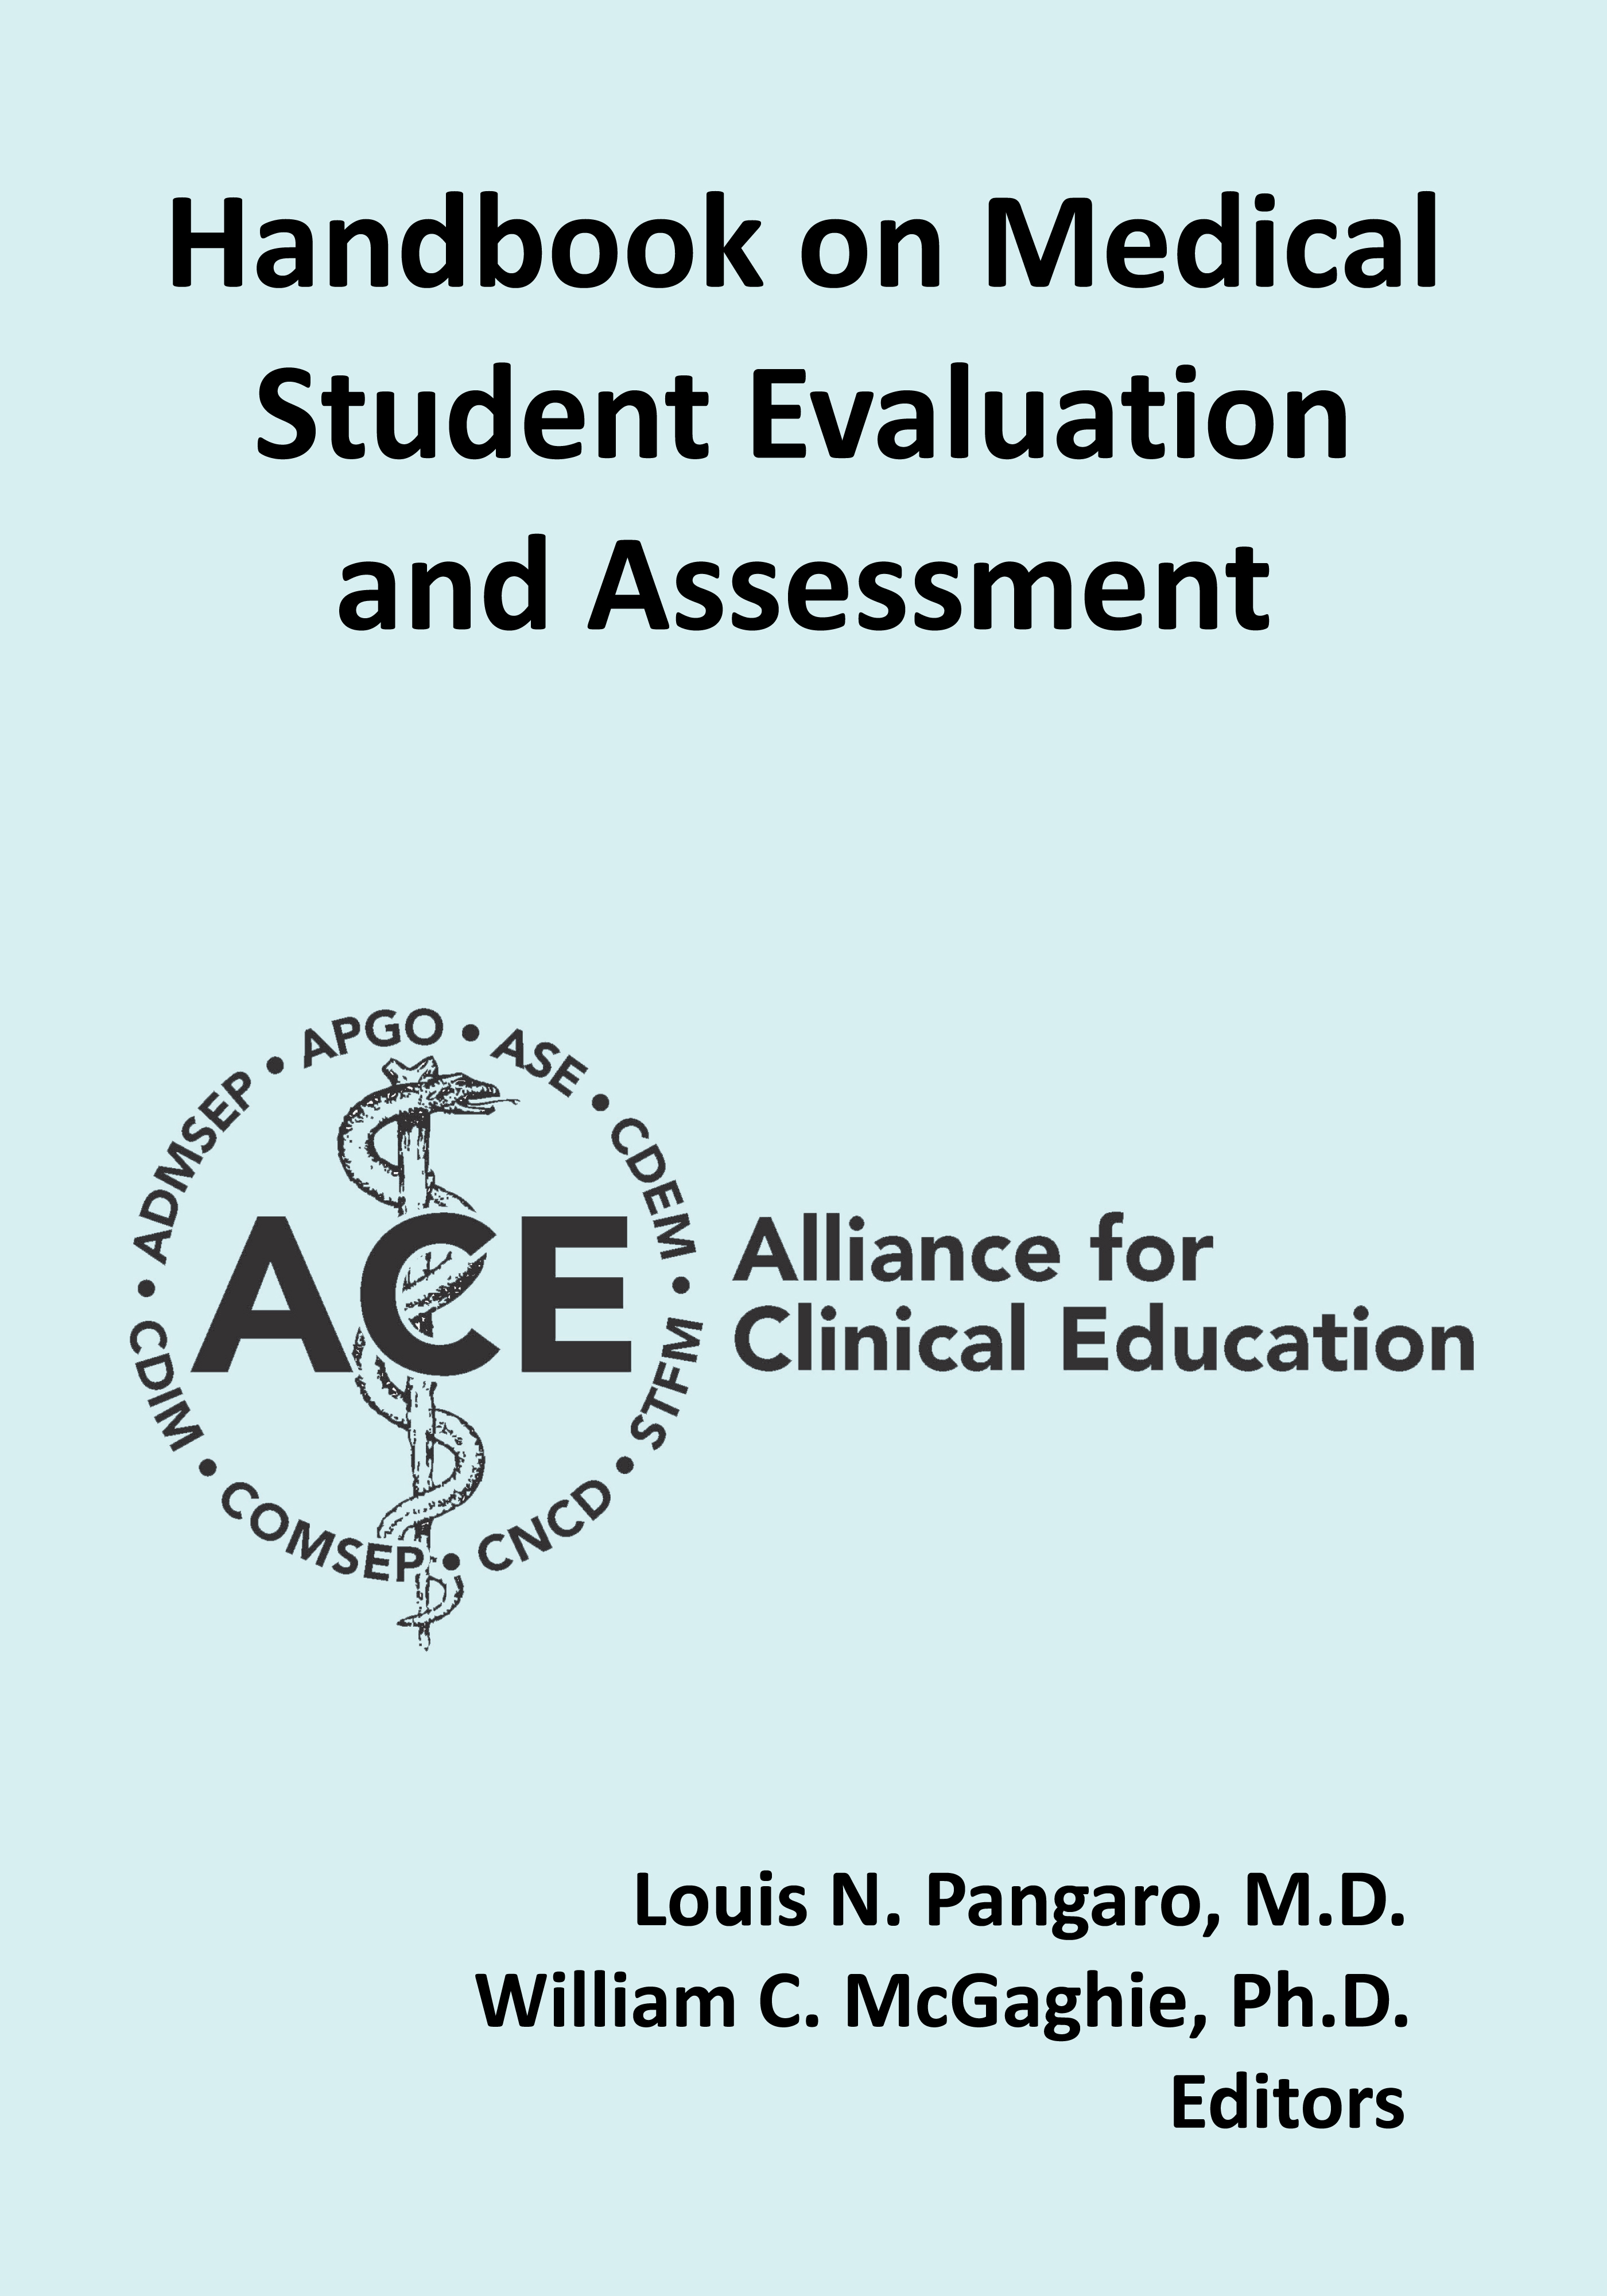 Handbook on Medical Student Evaluation and Assessment by the Alliance for Clinical Education